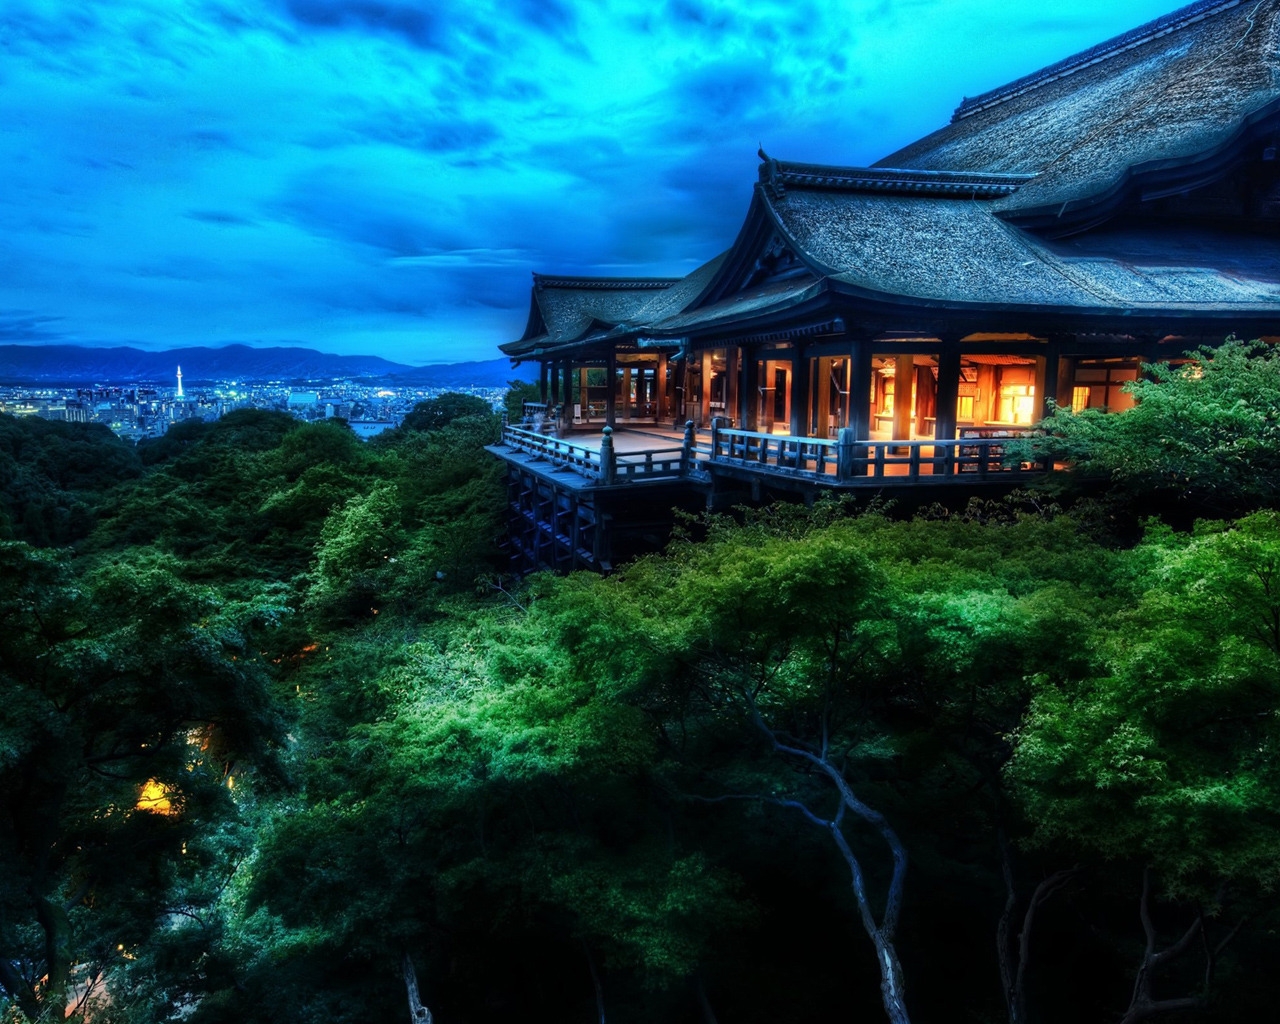 Kyoto Japan for 1280 x 1024 resolution